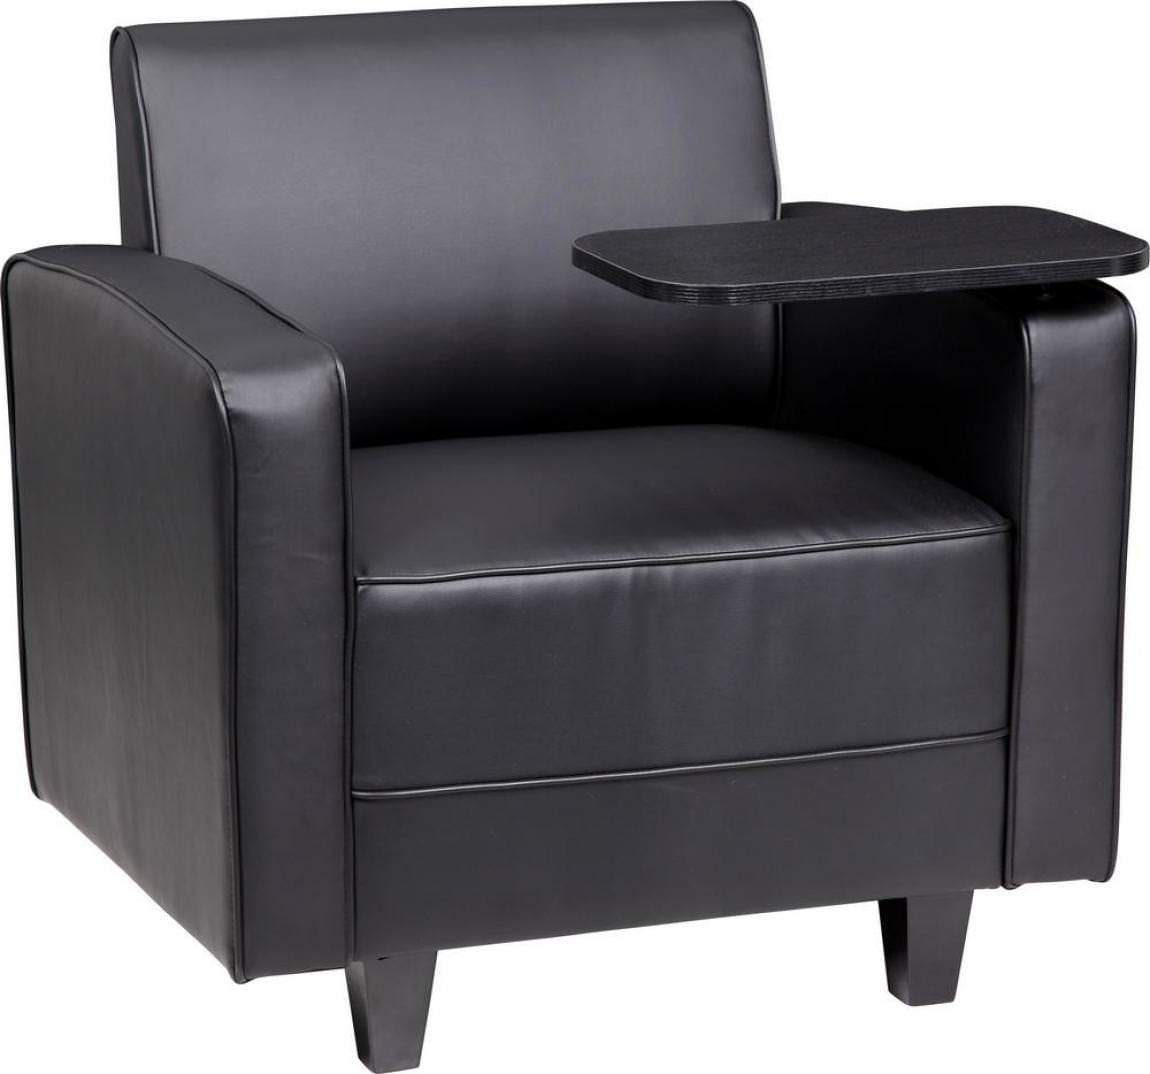 Black Club Chair with Tablet Arm